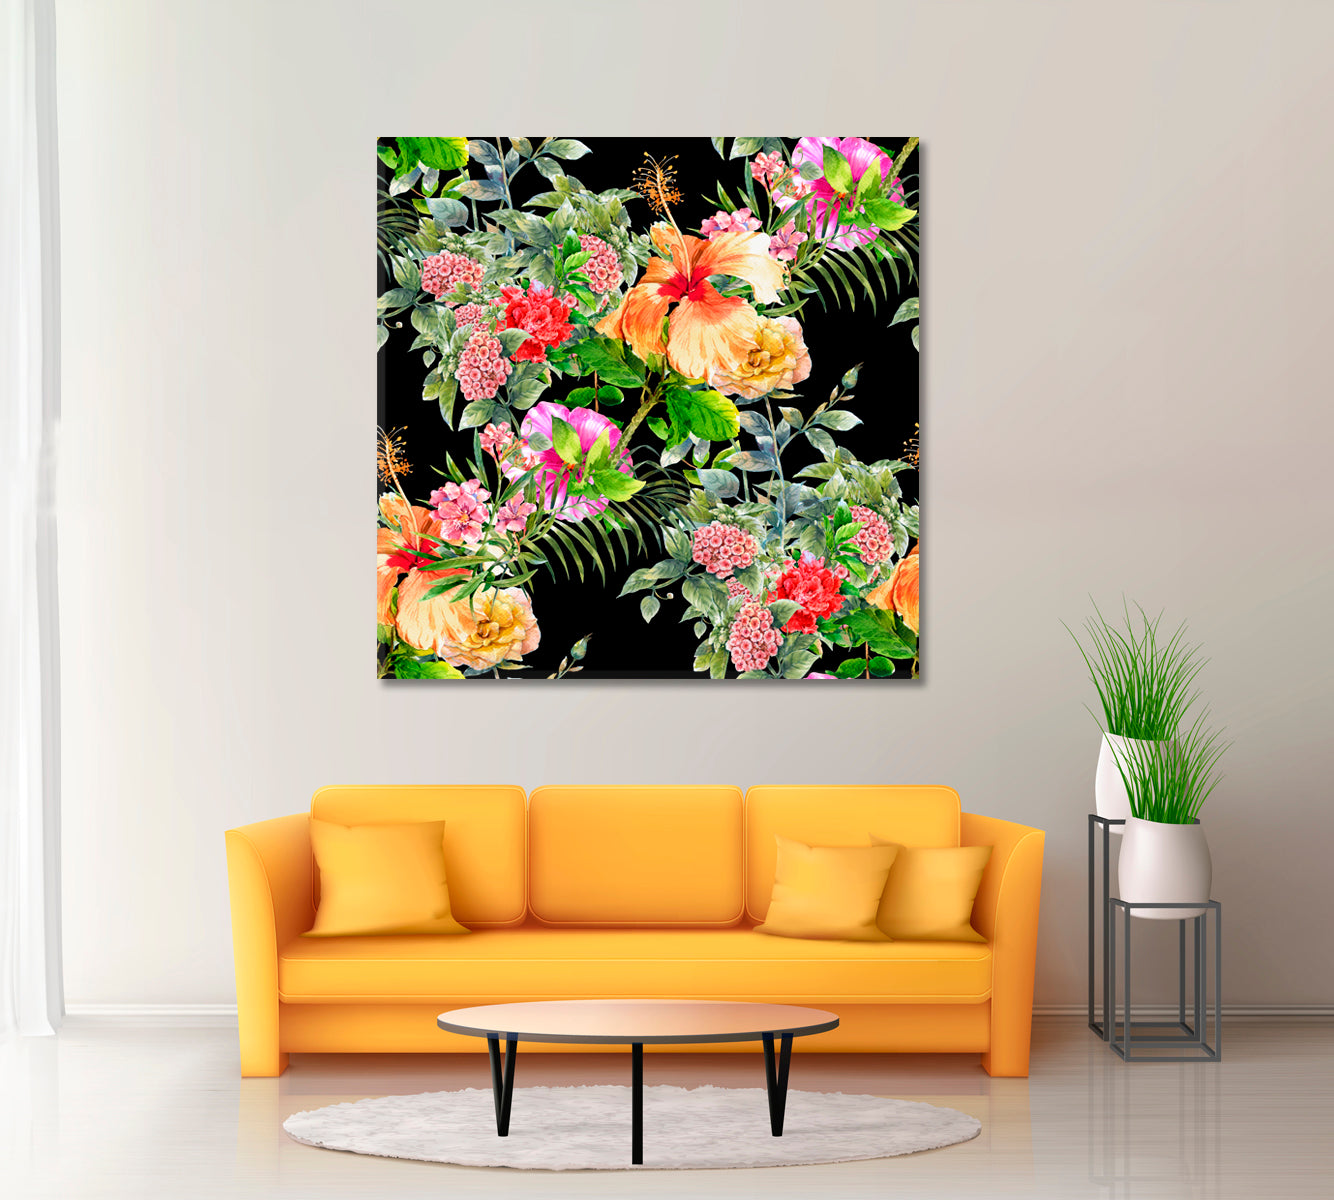 Colorful Watercolor Painting of Leaf and Flowers Canvas Print ArtLexy 1 Panel 12"x12" inches 